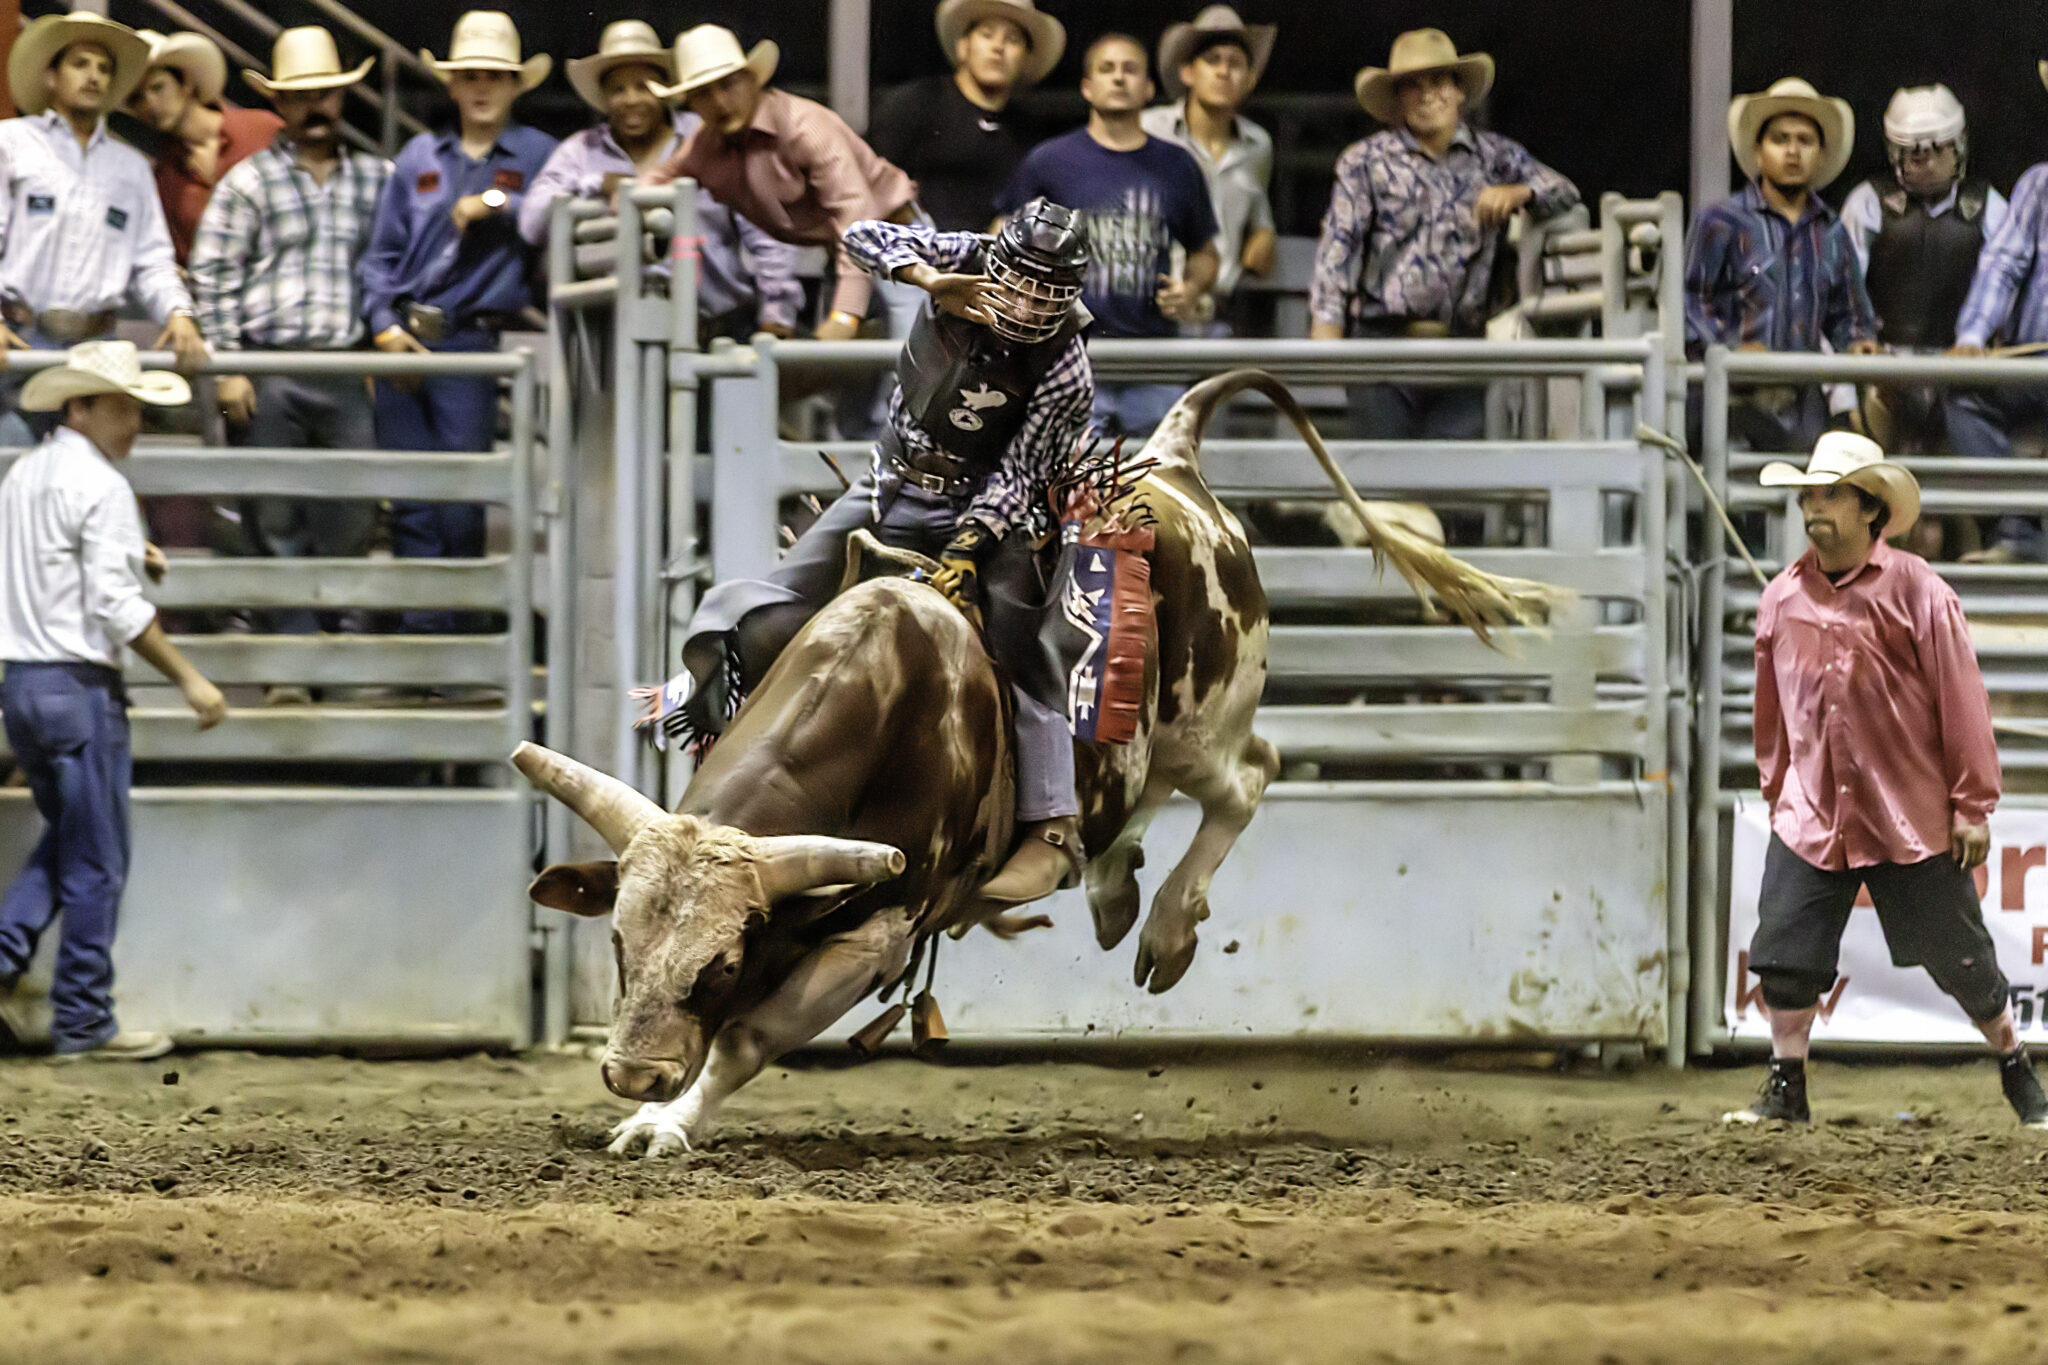 Ranch Rodeo / Bull Riding Events